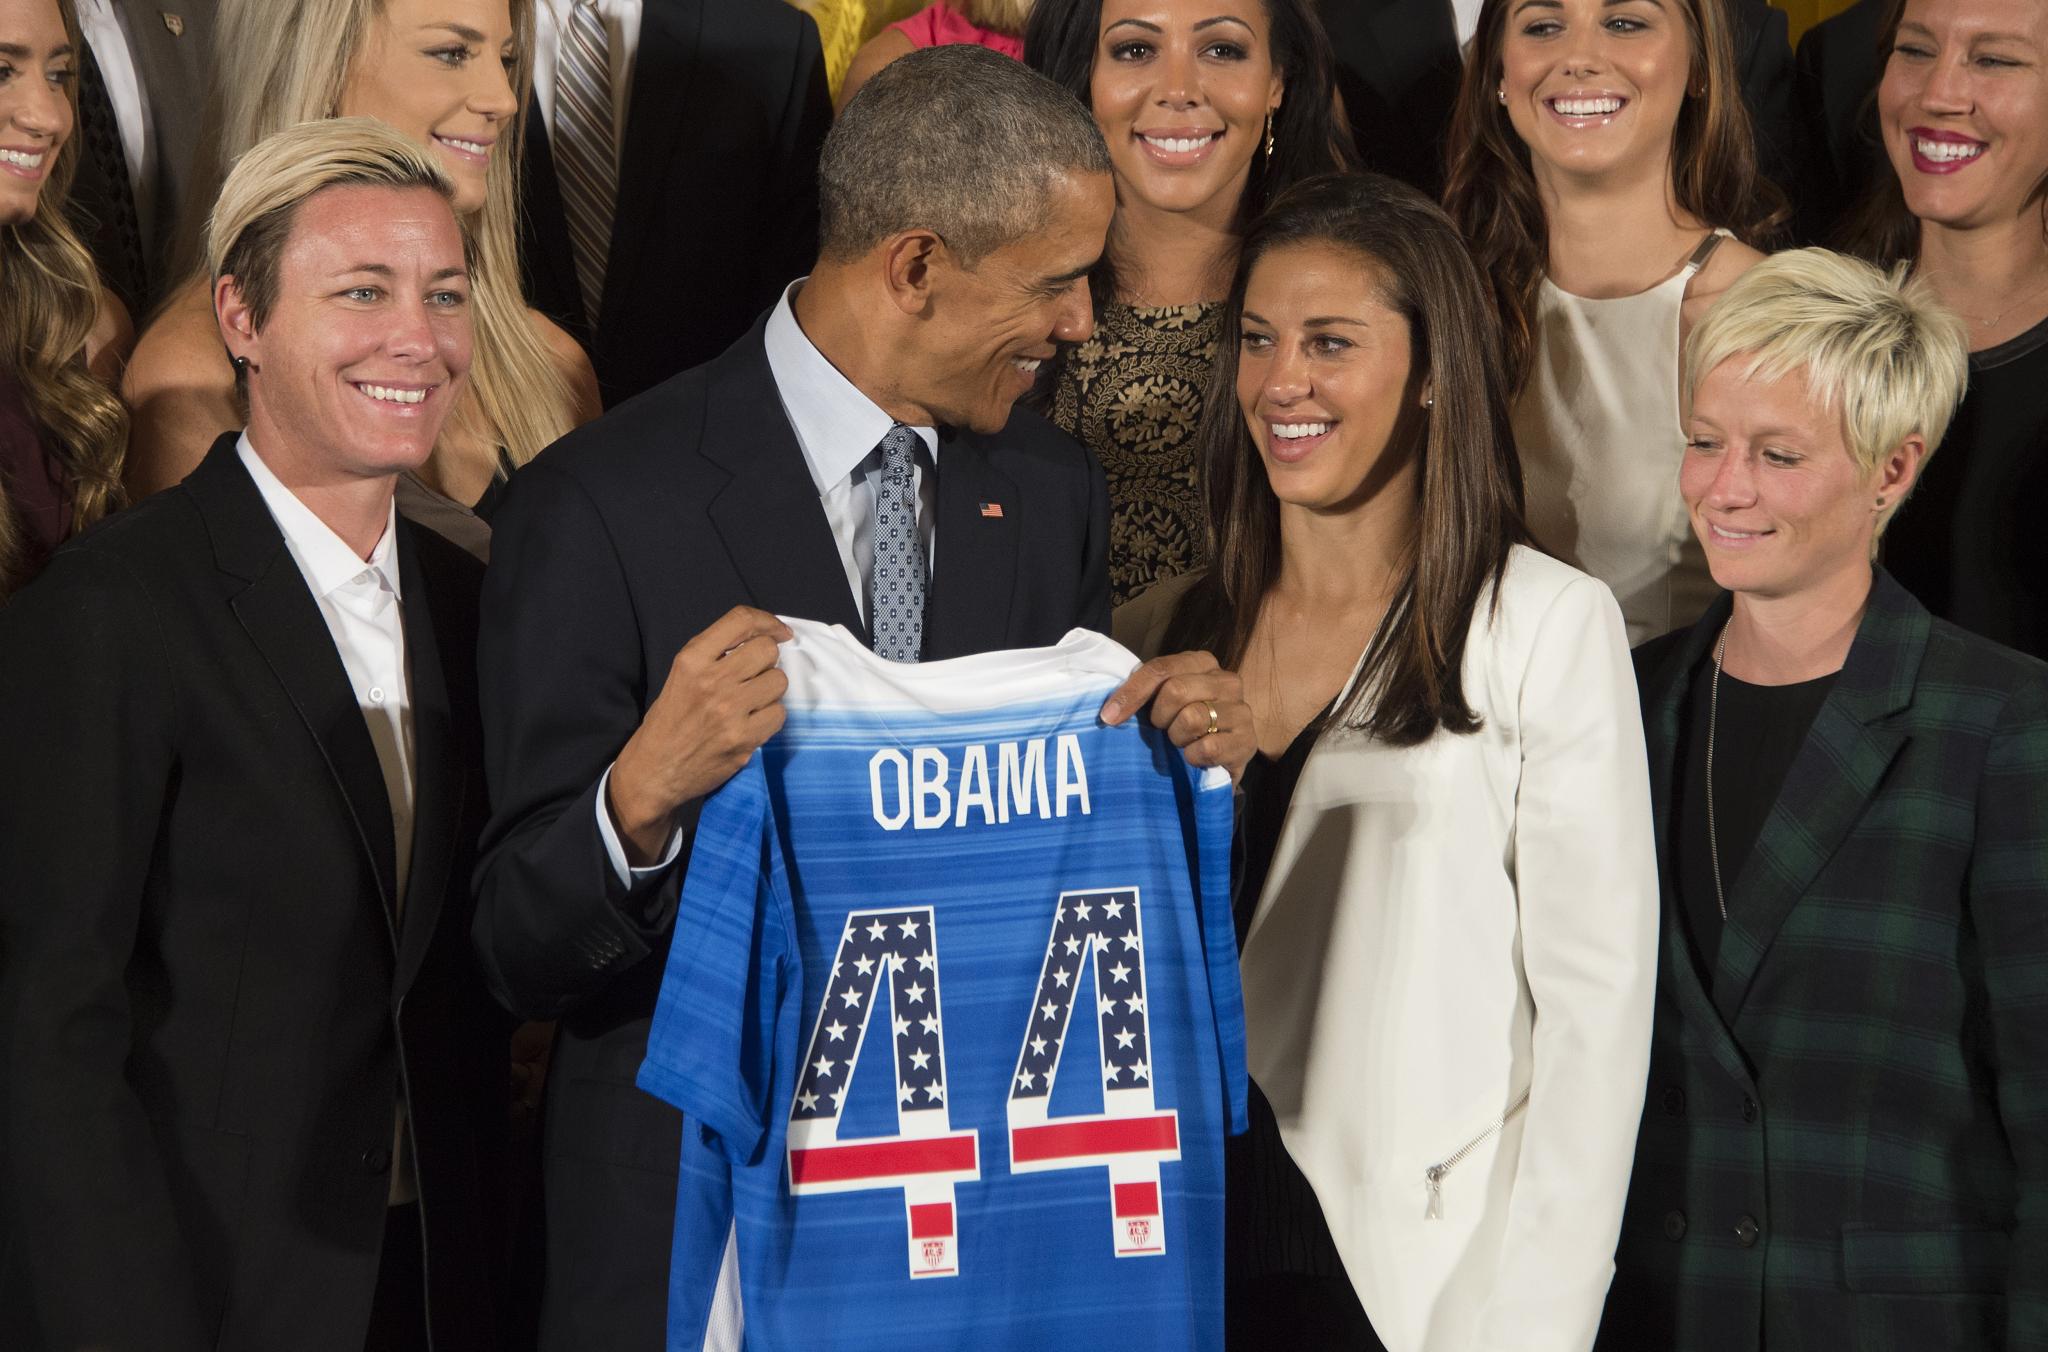 Obama: Women’s US Soccer Team Proved ‘Playing Like A Girl’ Means You’re a Badass